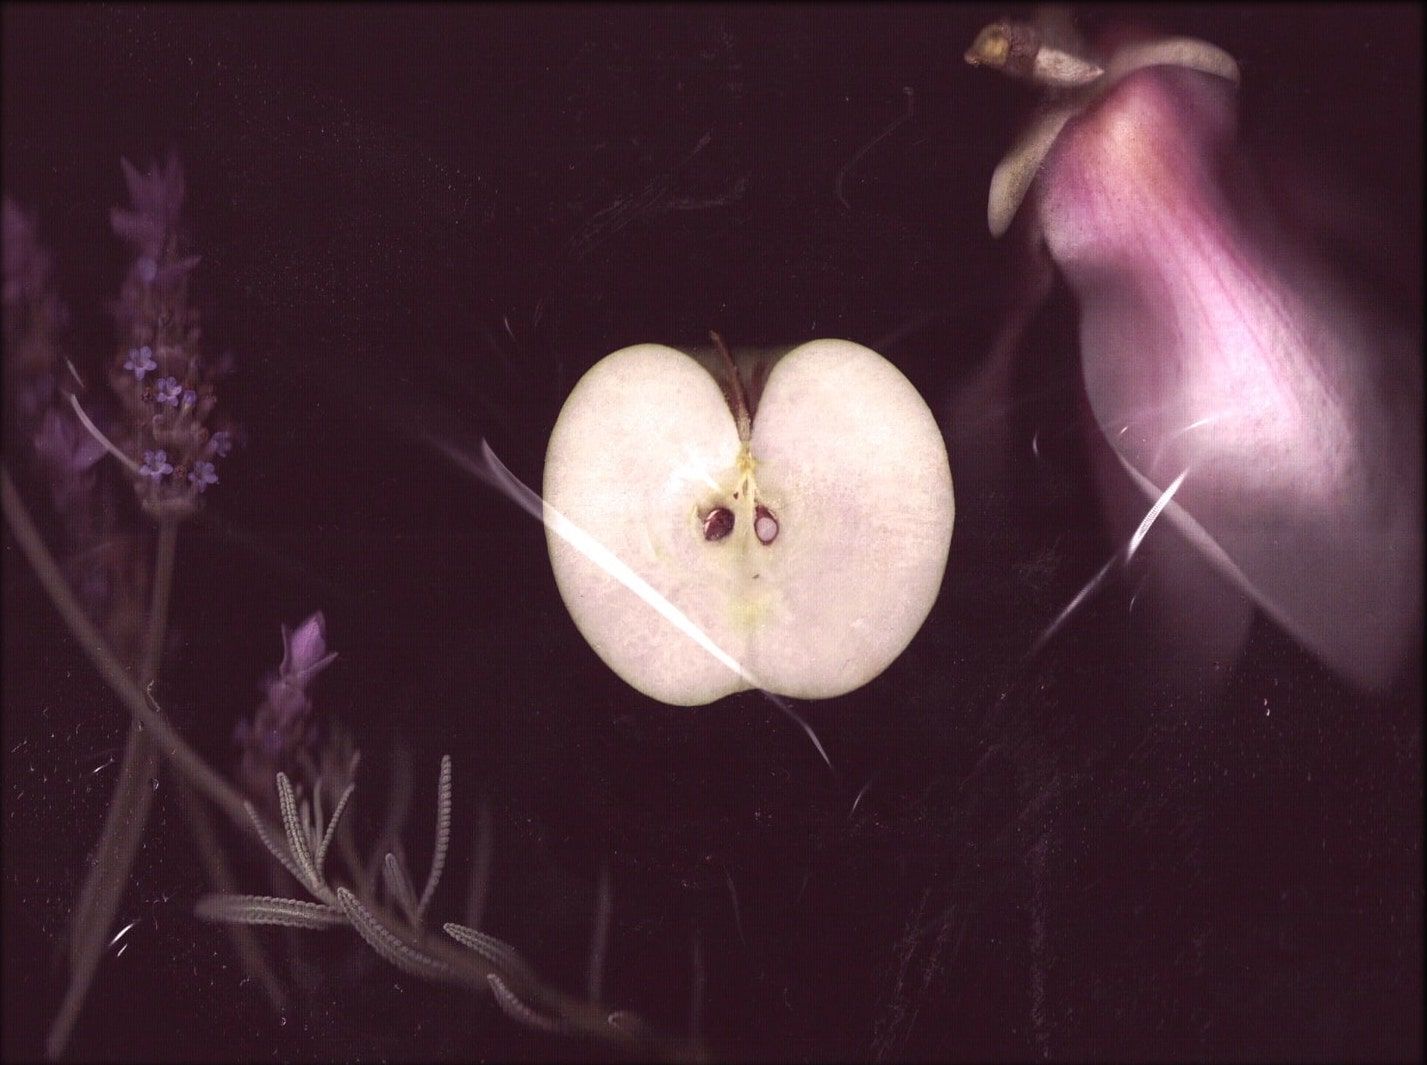 A cut apple rests between flowers, arranged over a crumpled plastic film